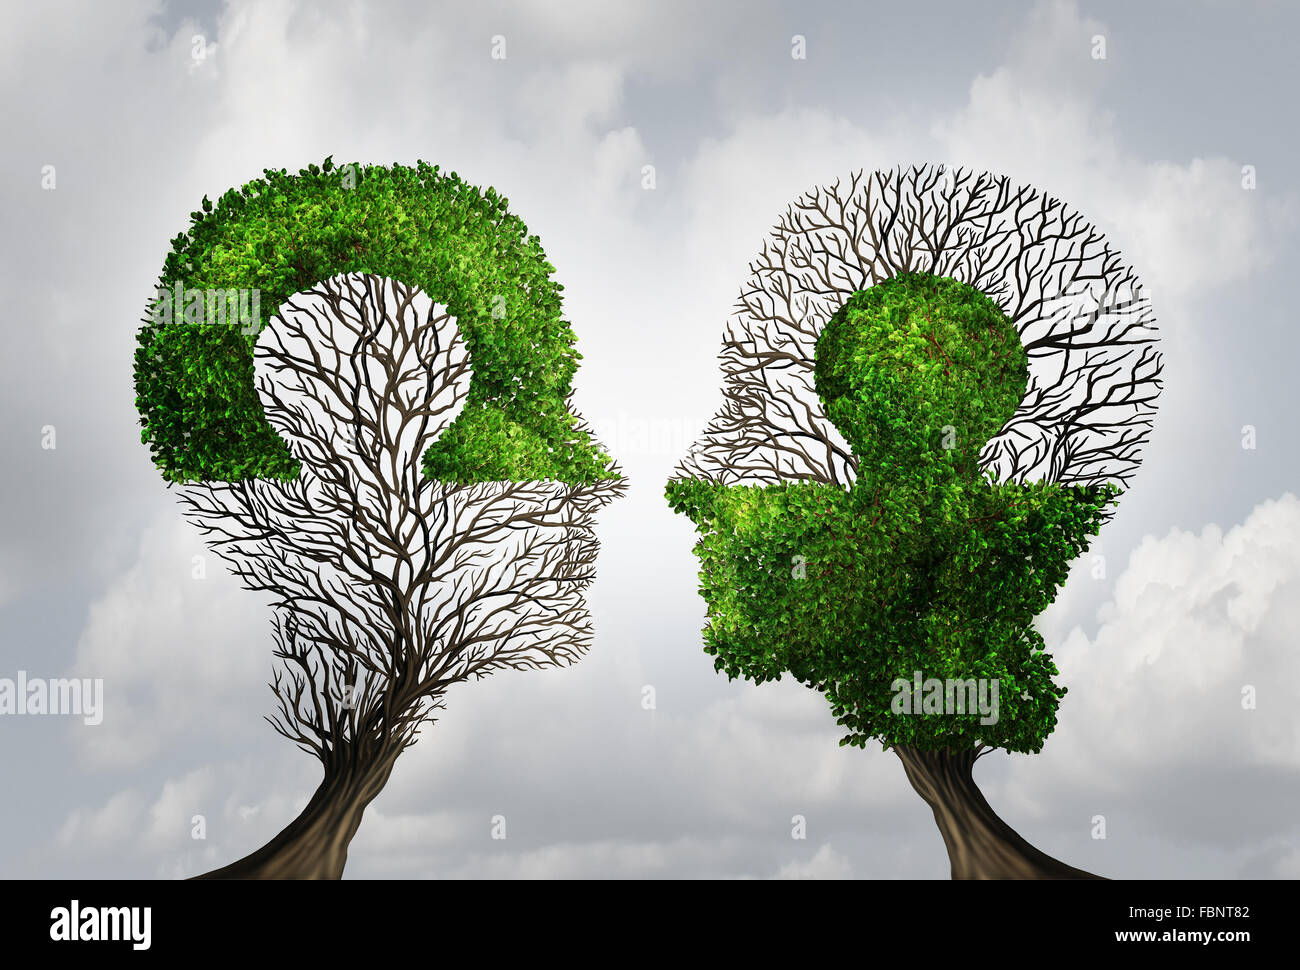 Perfect business partnership as a connecting puzzle shaped as two trees in the form of human heads connecting together to complete each other as a corporate success metaphor for cooperation and agreement as equal partners. Stock Photo